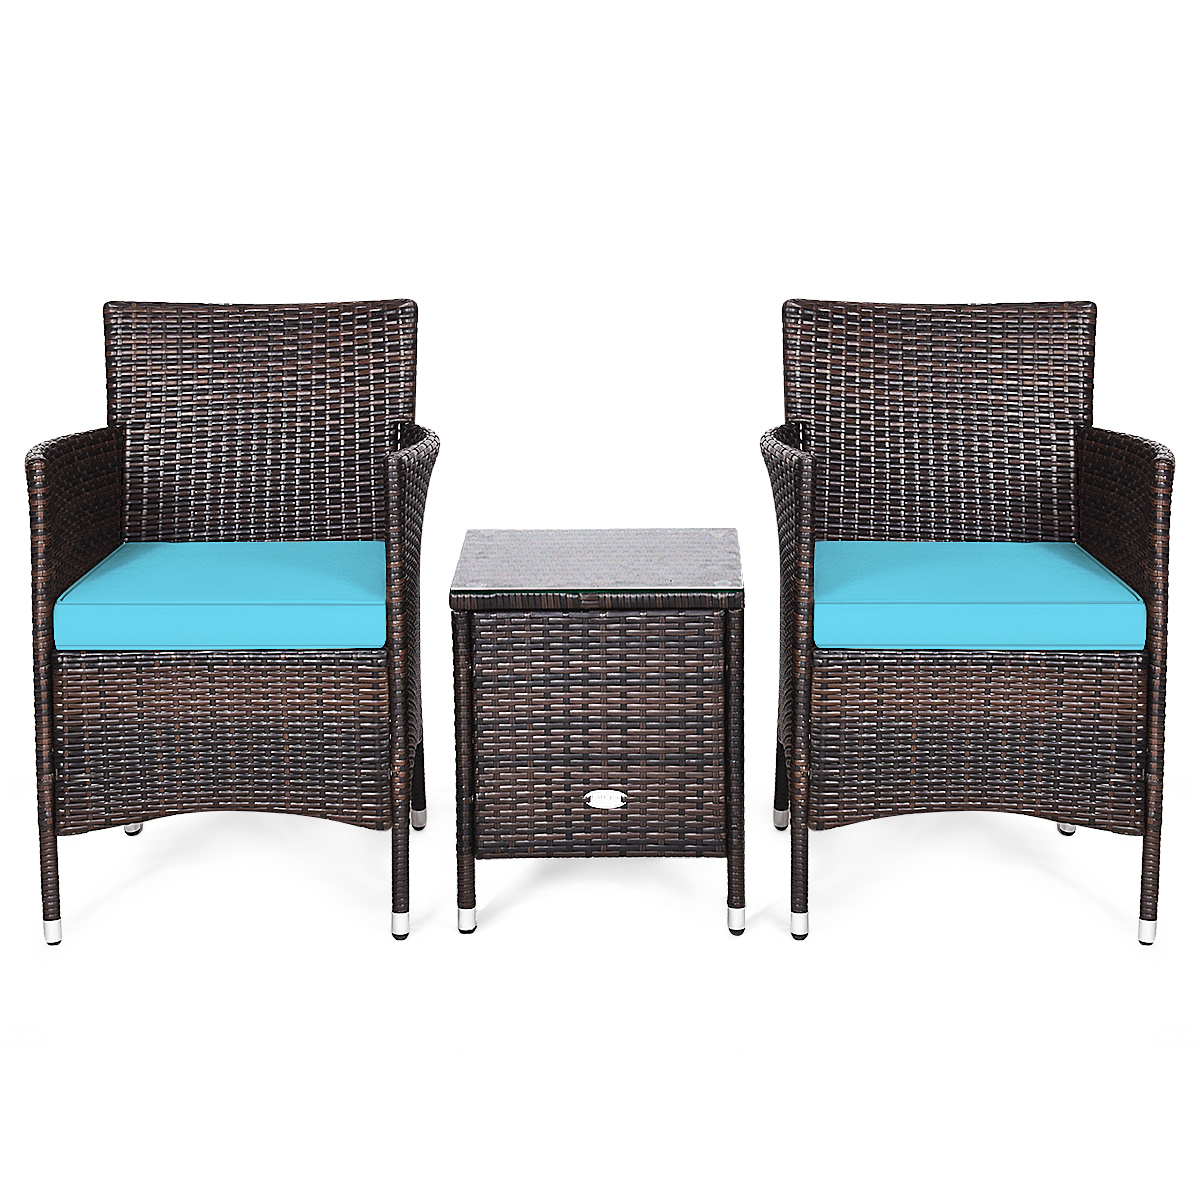 Costway Outdoor 3 PCS Rattan Wicker Furniture Sets Chairs Coffee Table Garden Blue - image 5 of 10